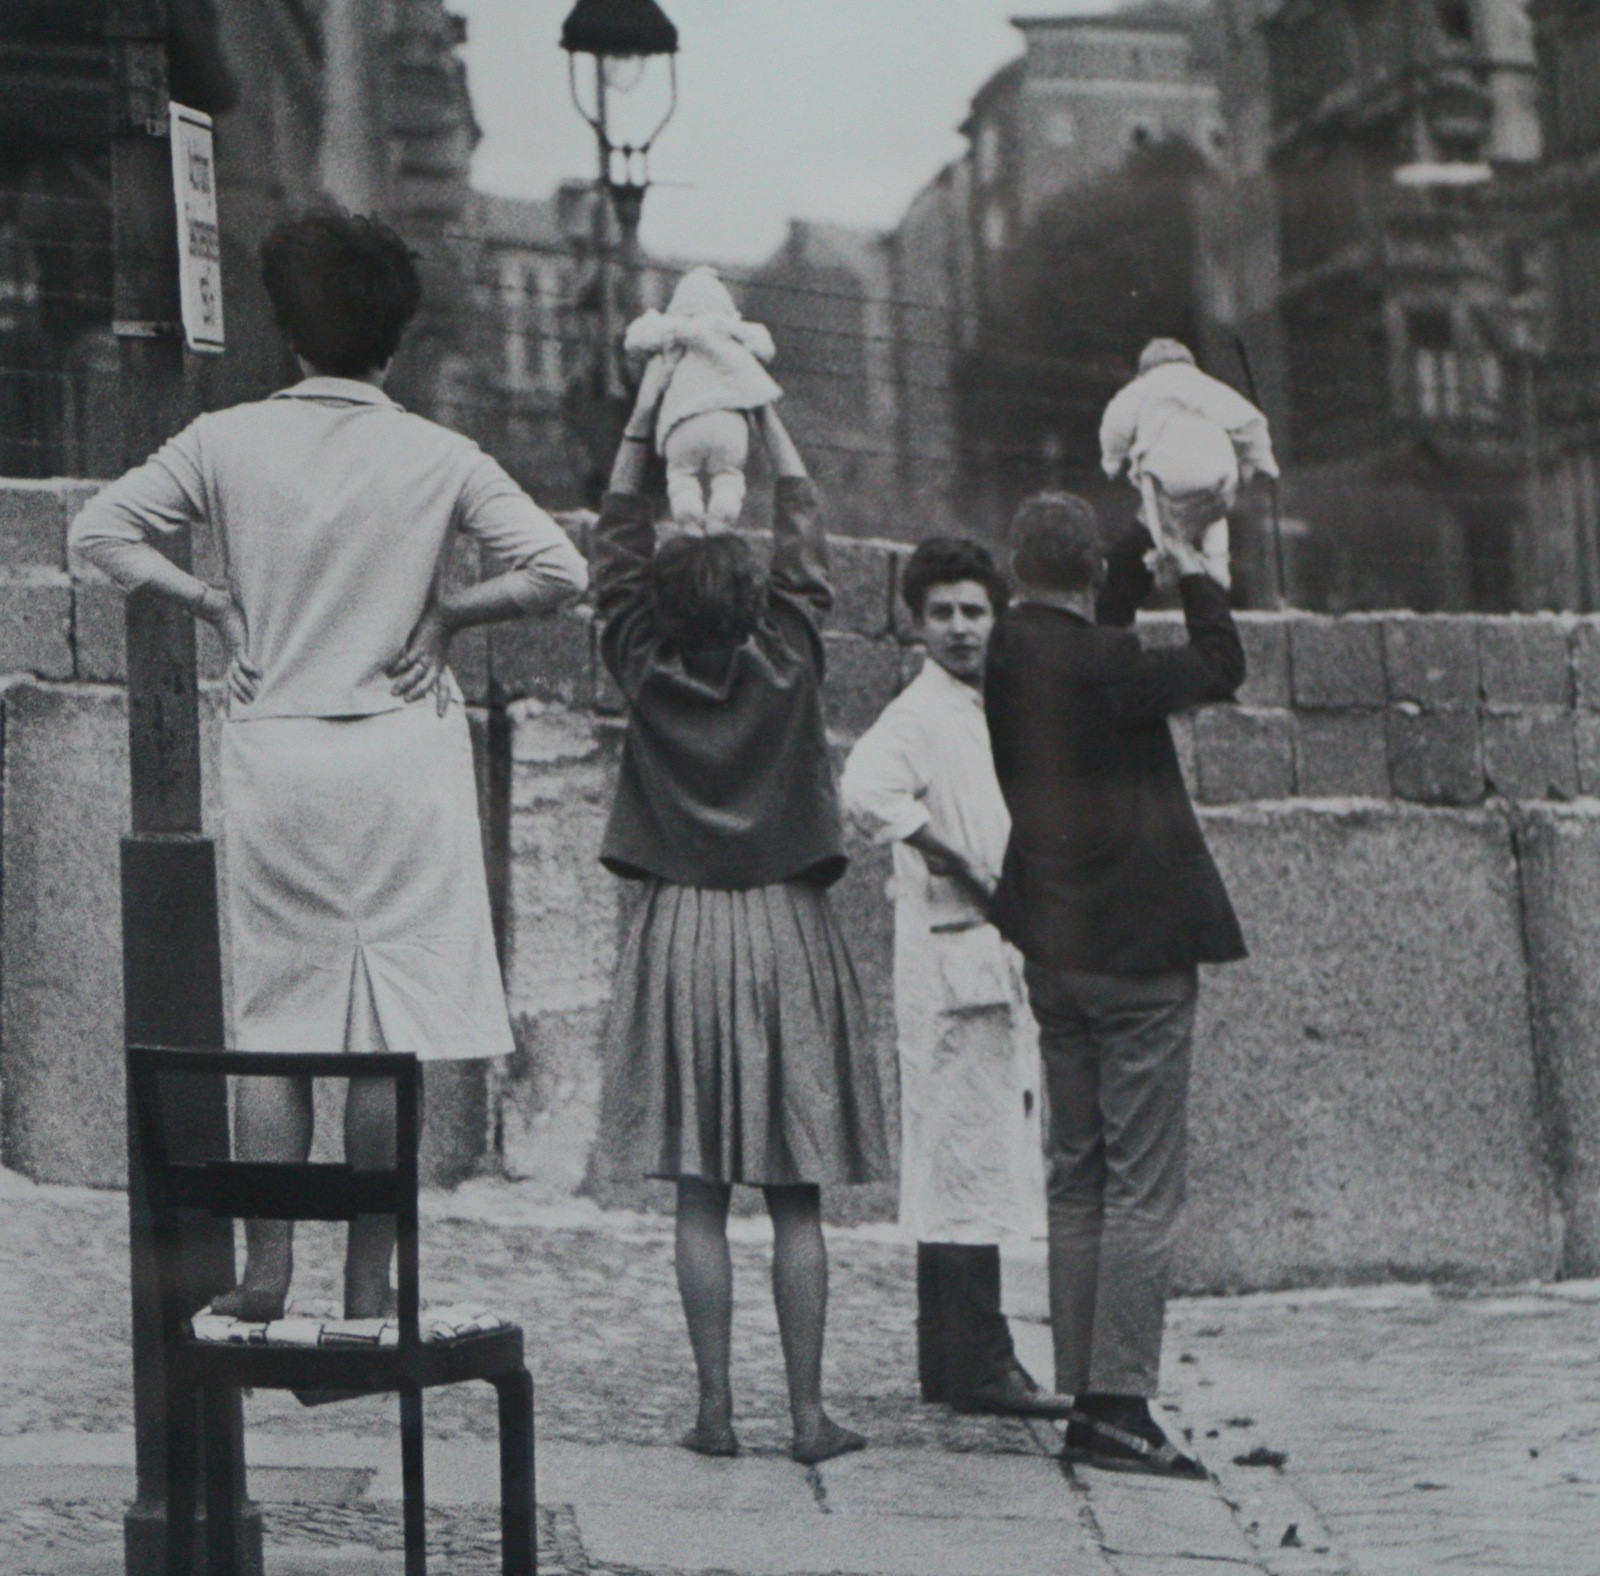 Residents of West Berlin show children to their grandparents who reside on the Eastern side, 1961.